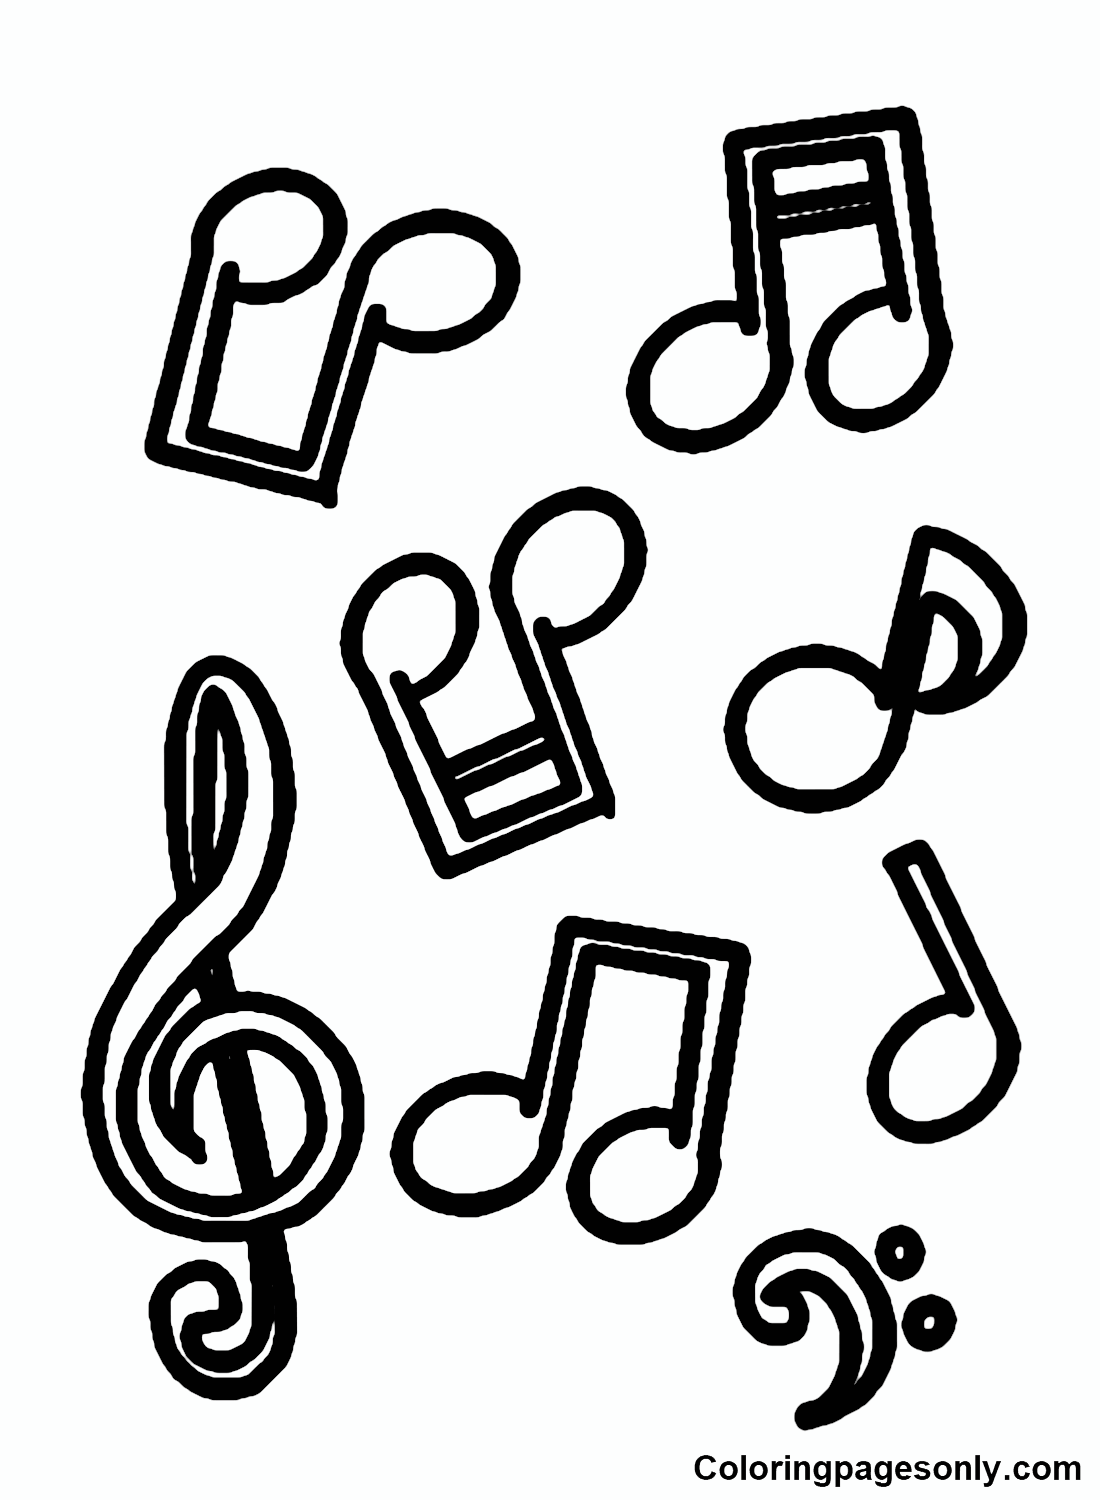 Music notes coloring pages printable for free download